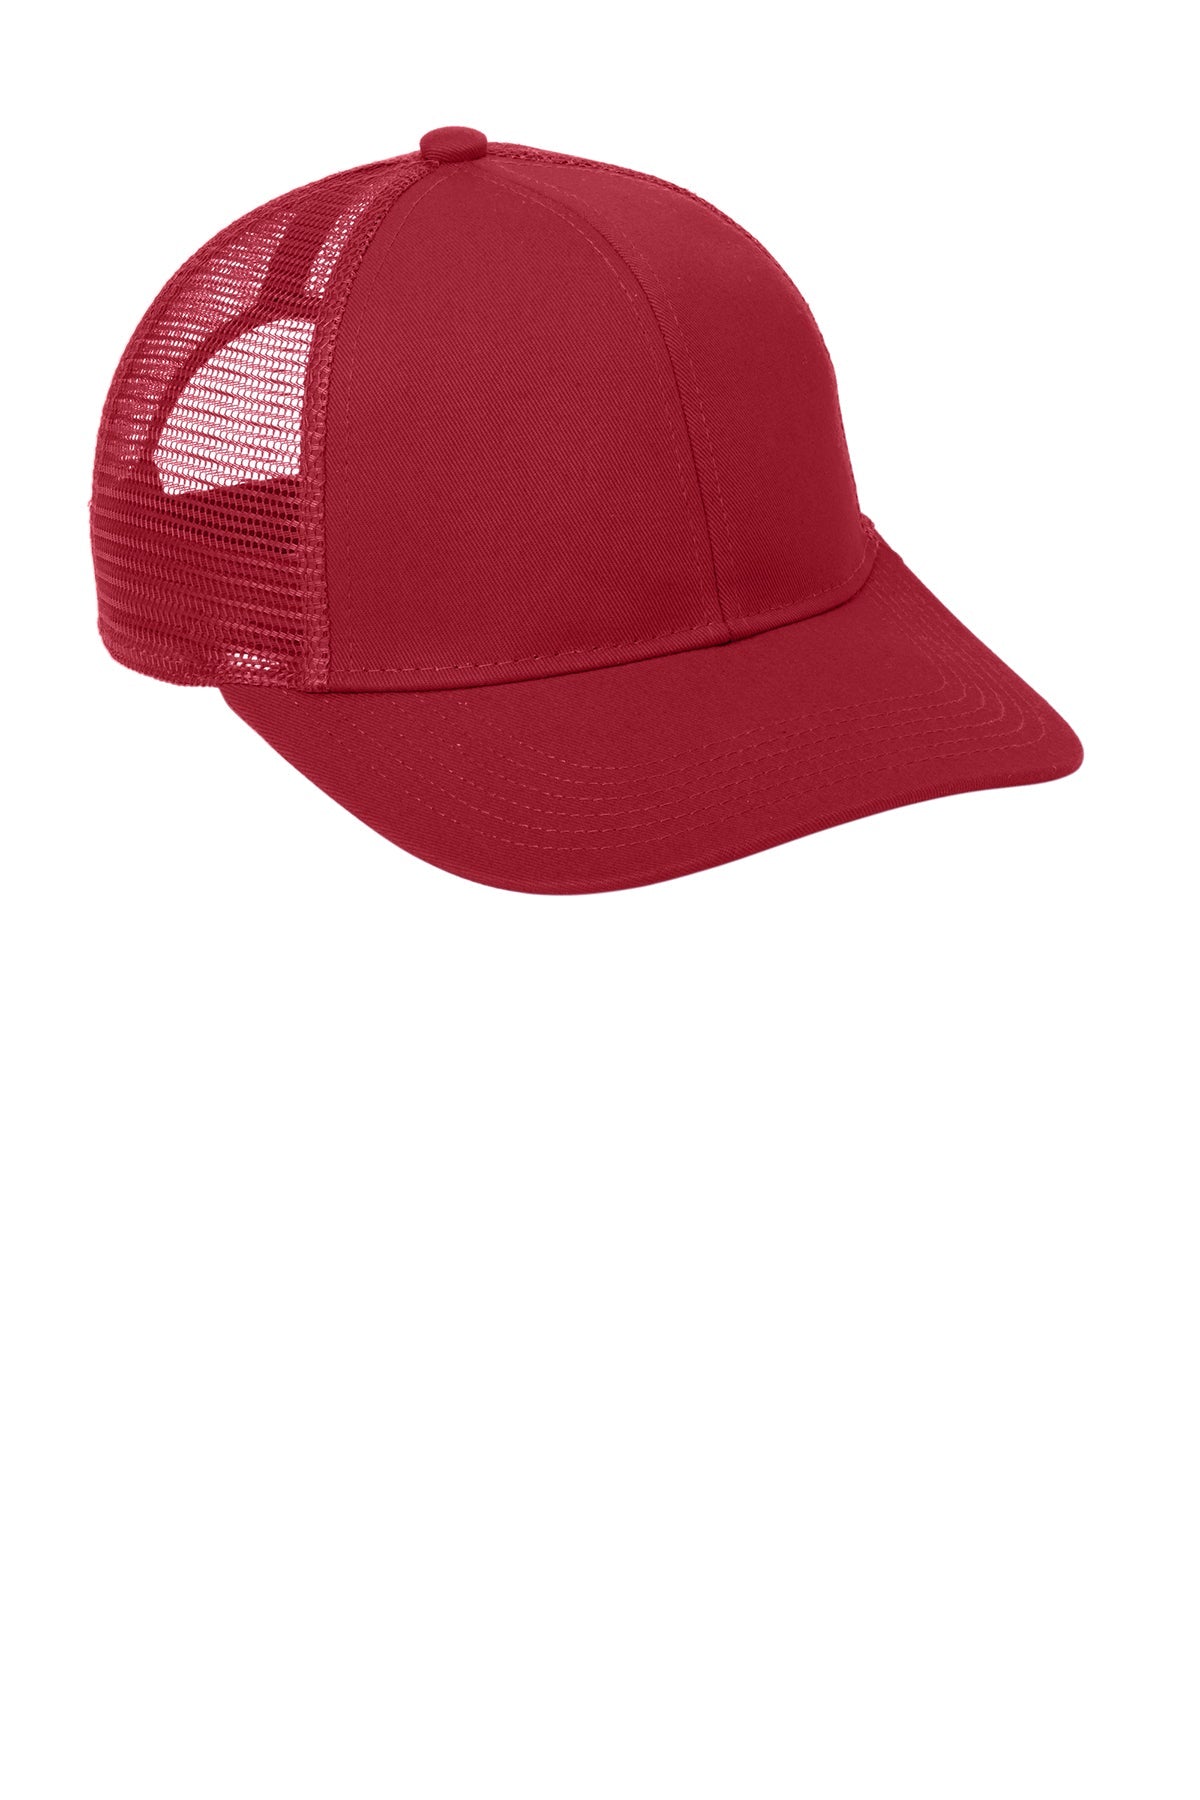 Port Authority Adjustable Mesh Back Branded Caps, Chili Red